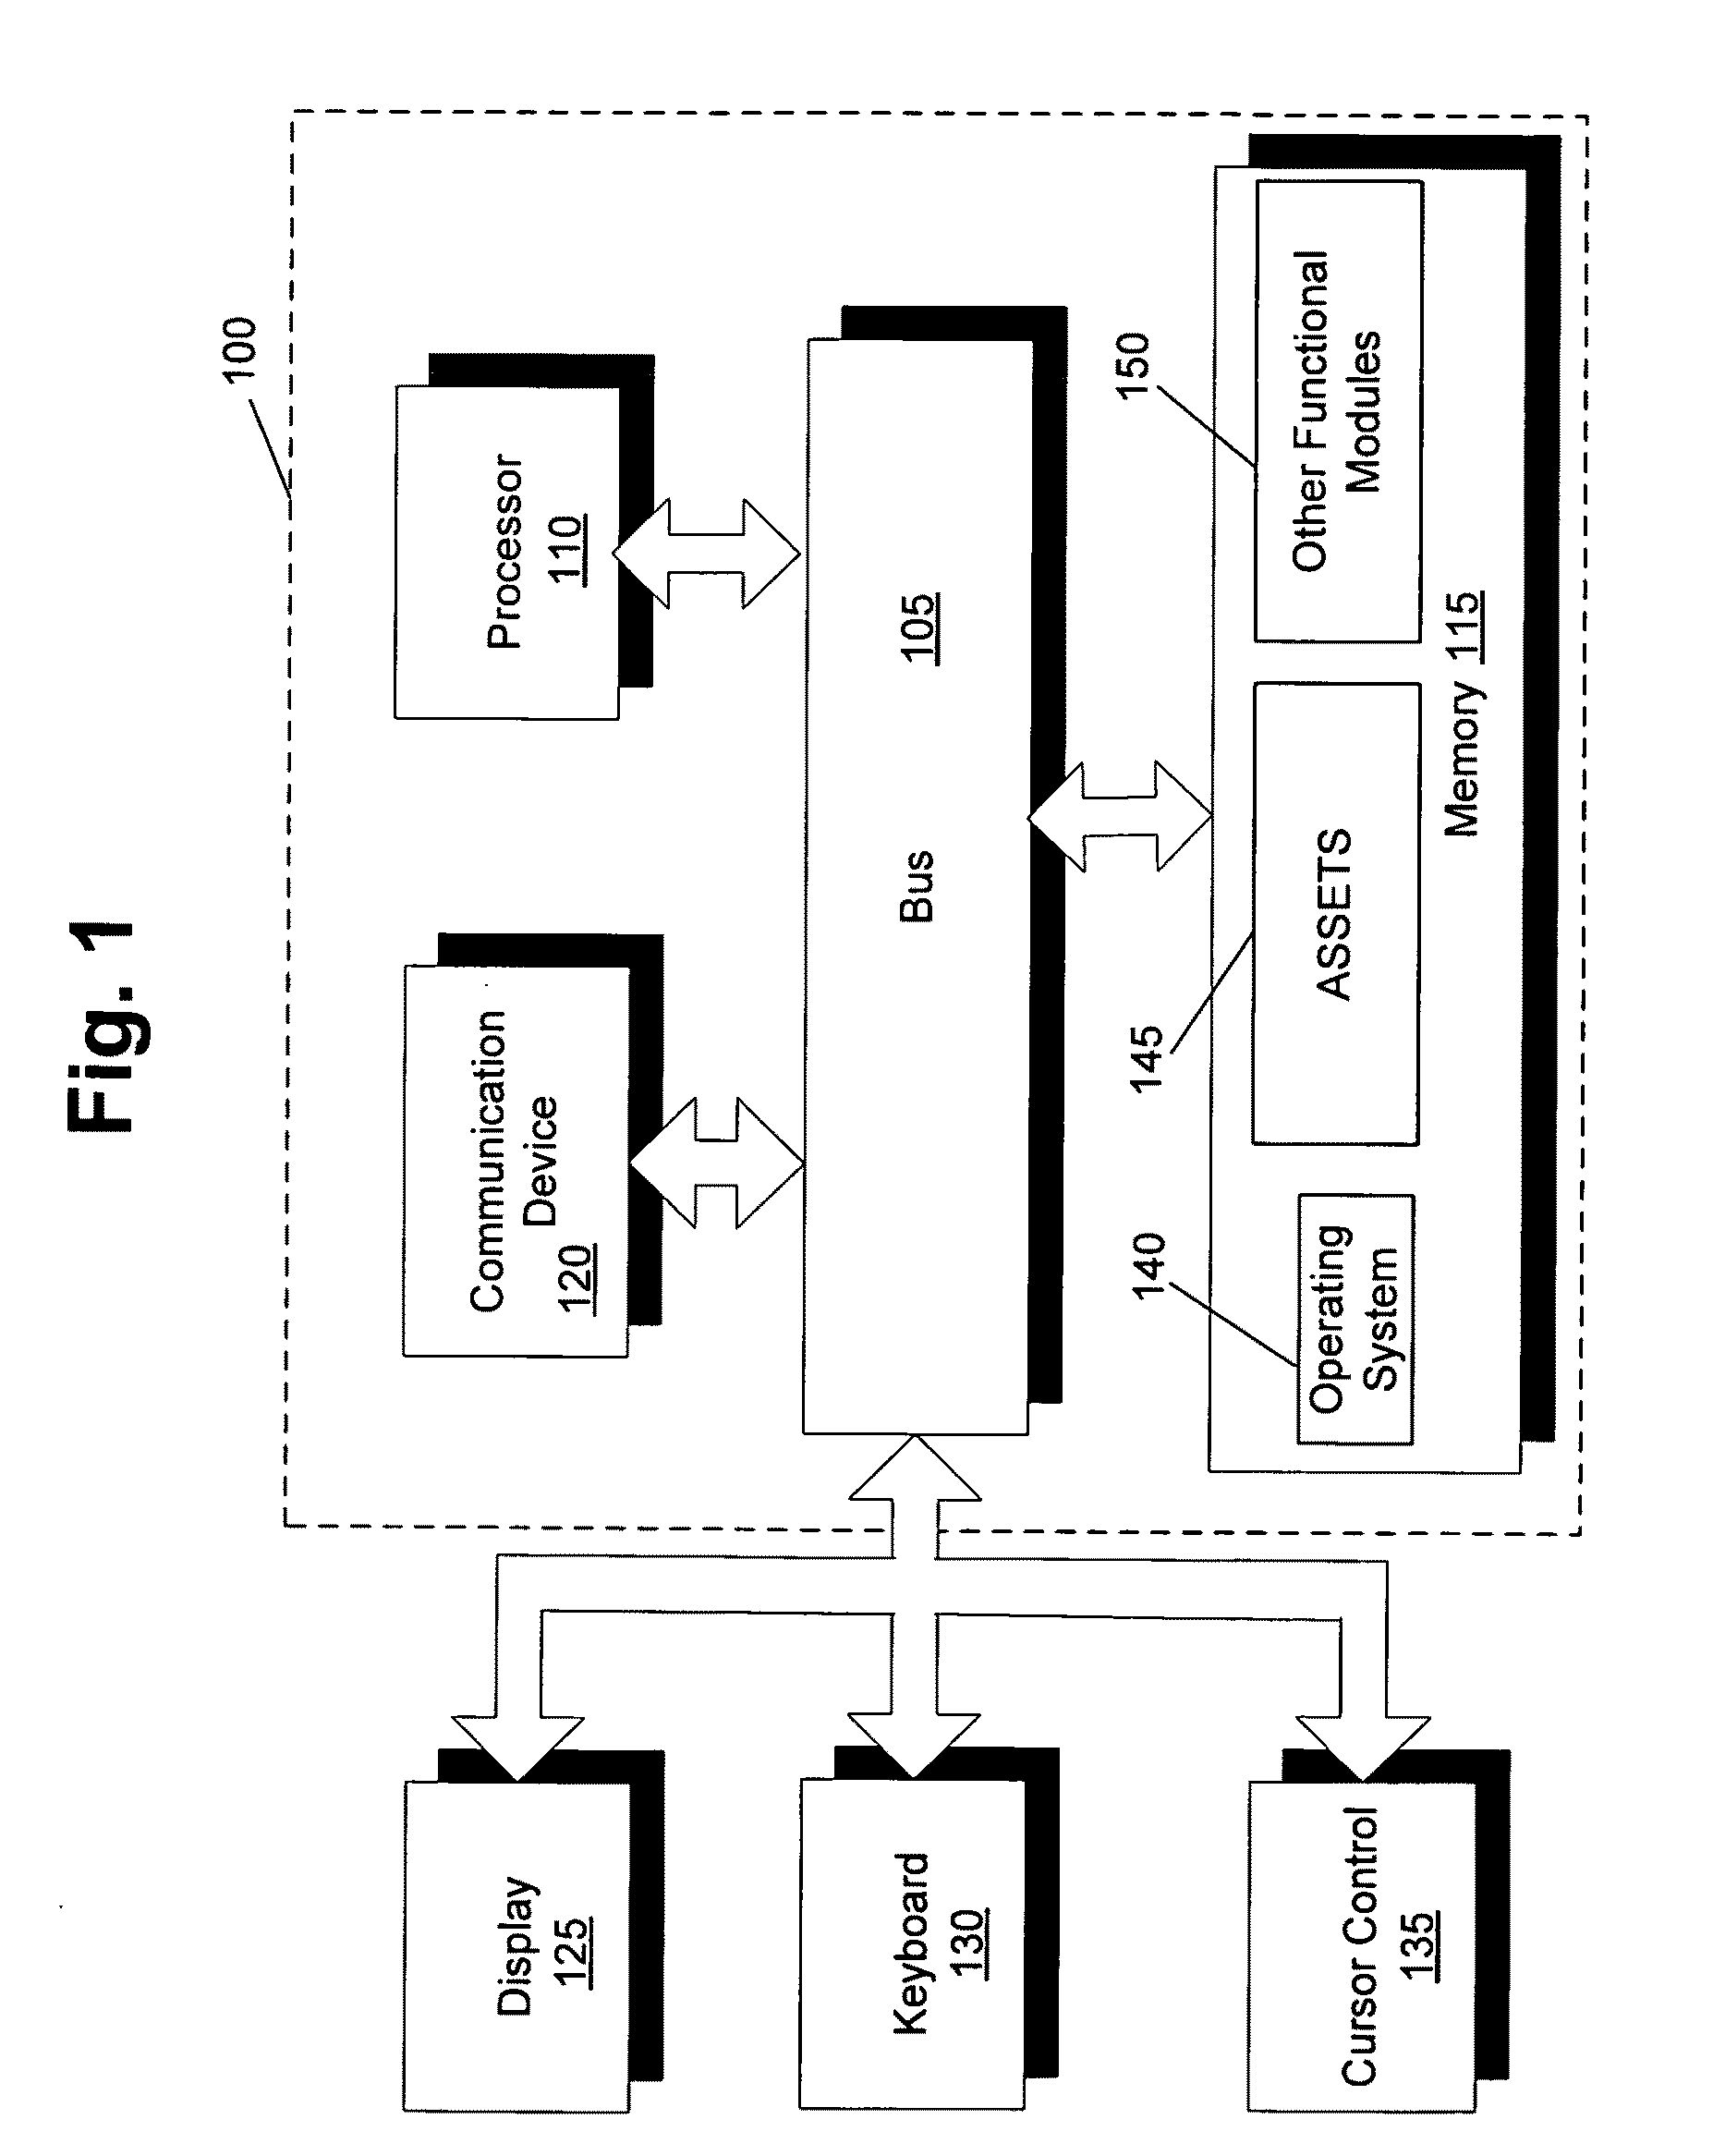 Structured data translation apparatus, system and method